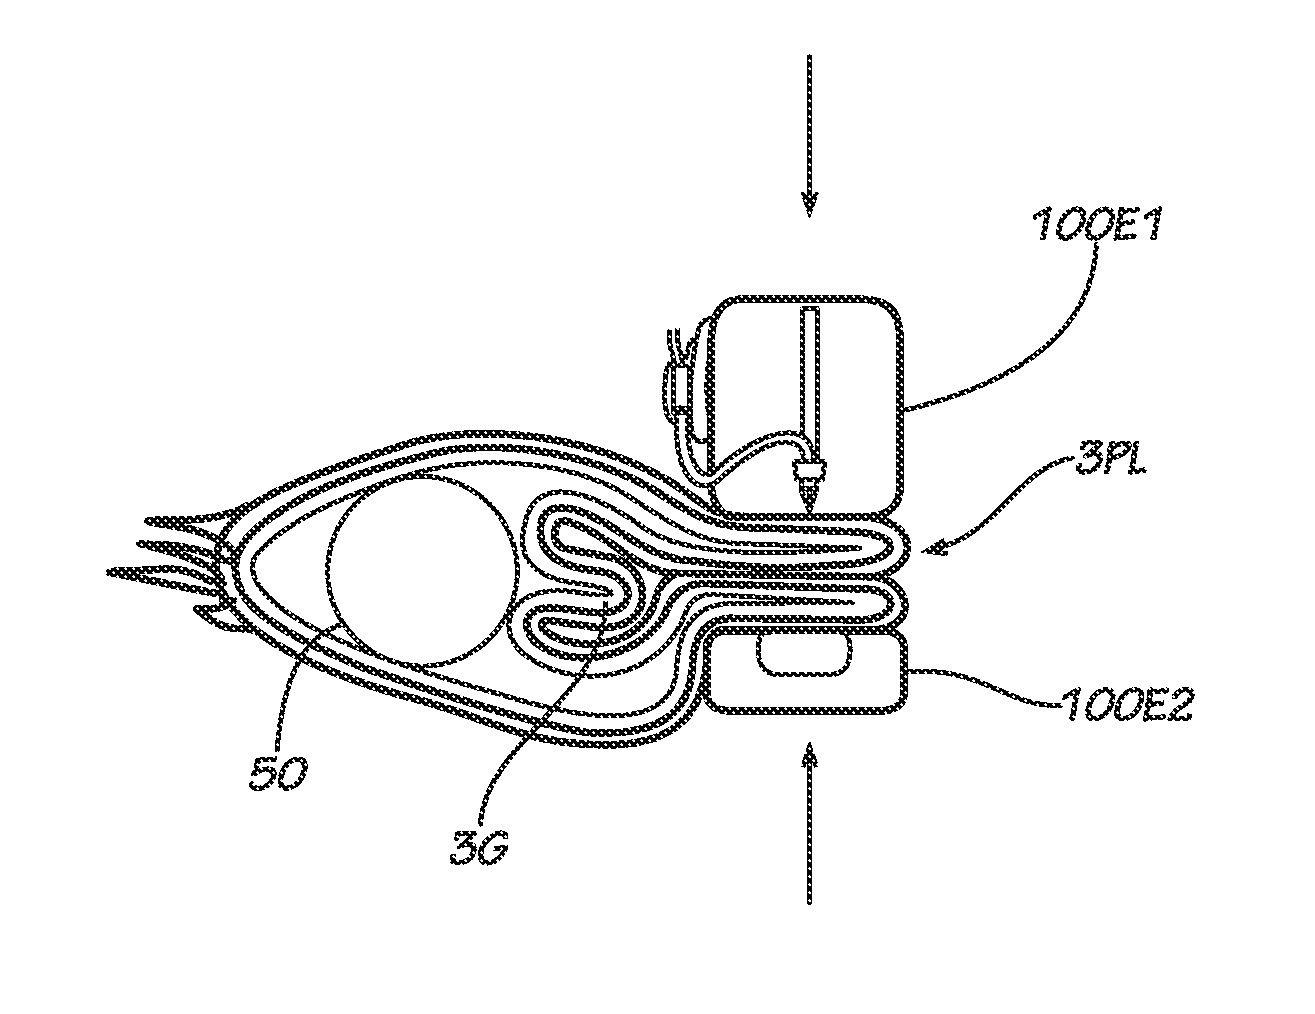 Methods, Instruments and Devices for Extragastric Reduction of Stomach Volume